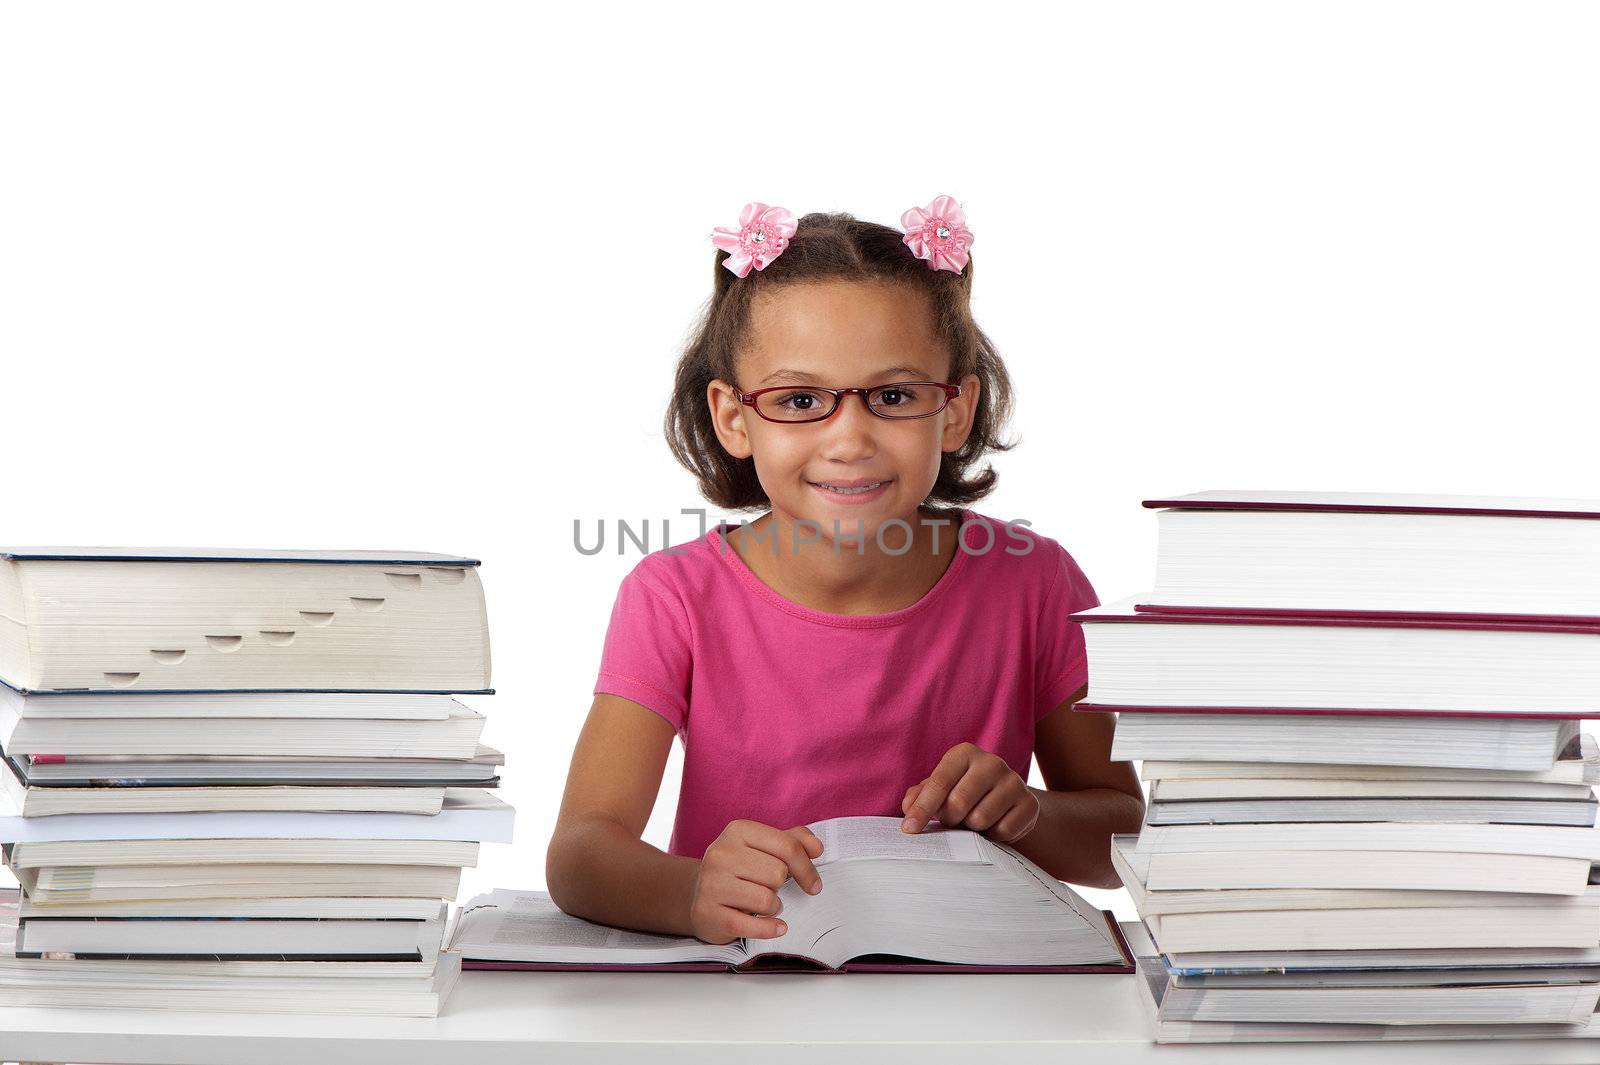 A young girl with spectacles enjoys studying large volumes of books.